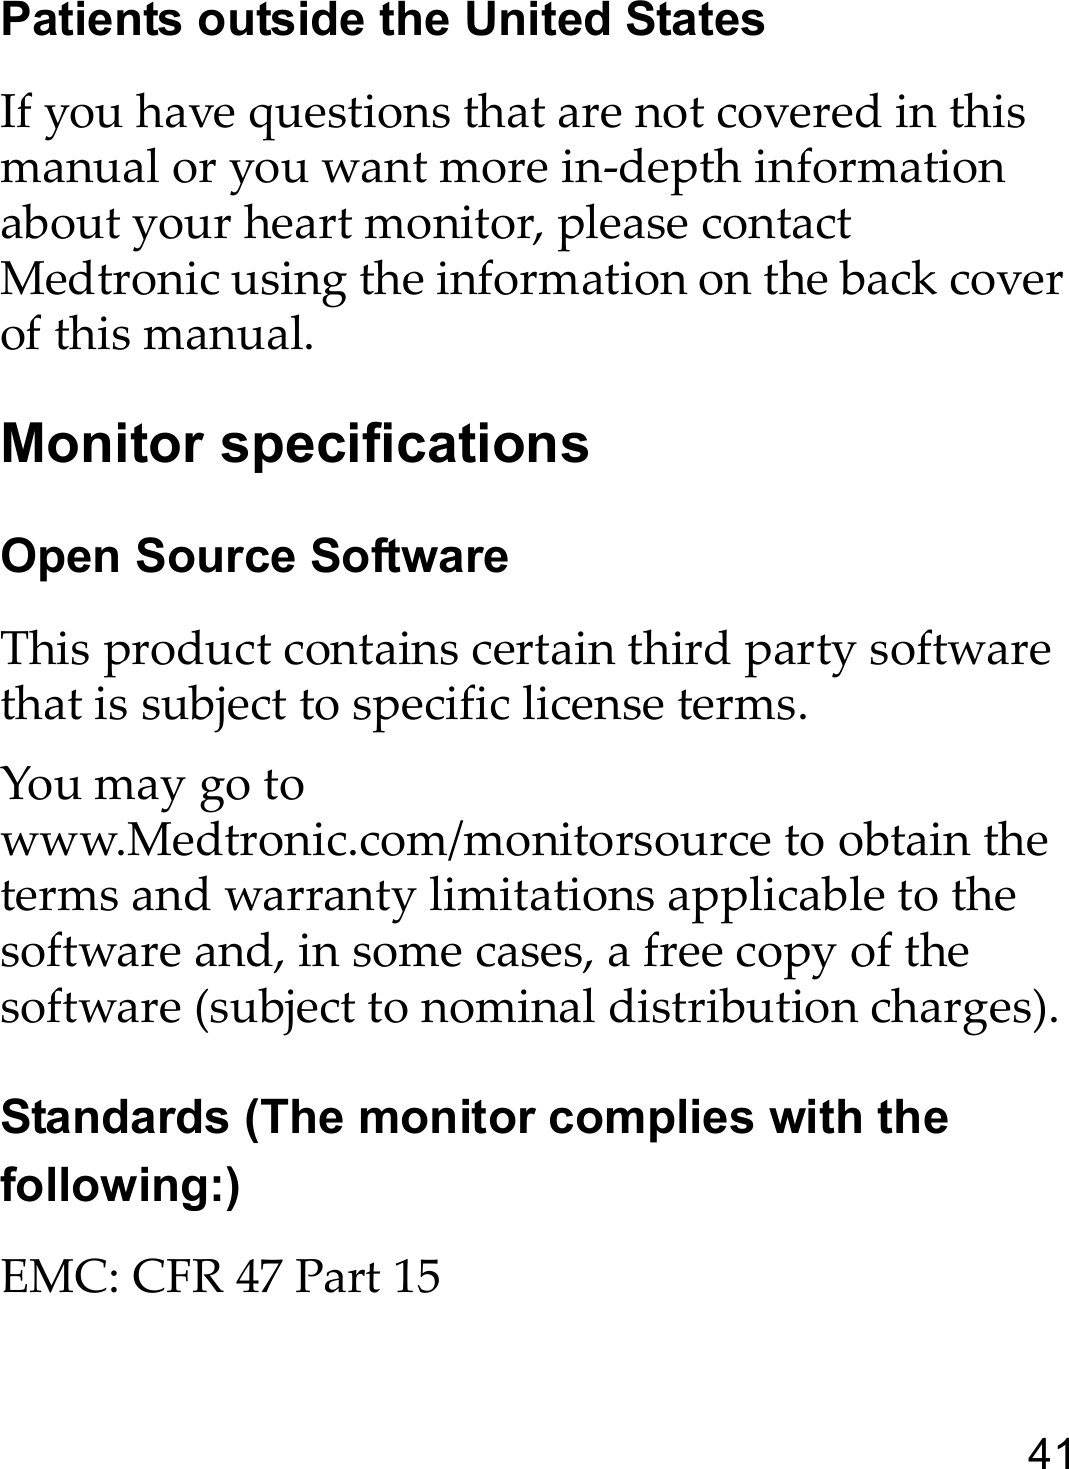 41Patients outside the United StatesIf you have questions that are not covered in this manual or you want more in-depth information about your heart monitor, please contact Medtronic using the information on the back cover of this manual. Monitor specificationsOpen Source SoftwareThis product contains certain third party software that is subject to specific license terms.   You may go to www.Medtronic.com/monitorsource to obtain the terms and warranty limitations applicable to the software and, in some cases, a free copy of the software (subject to nominal distribution charges).Standards (The monitor complies with the following:)EMC: CFR 47 Part 15